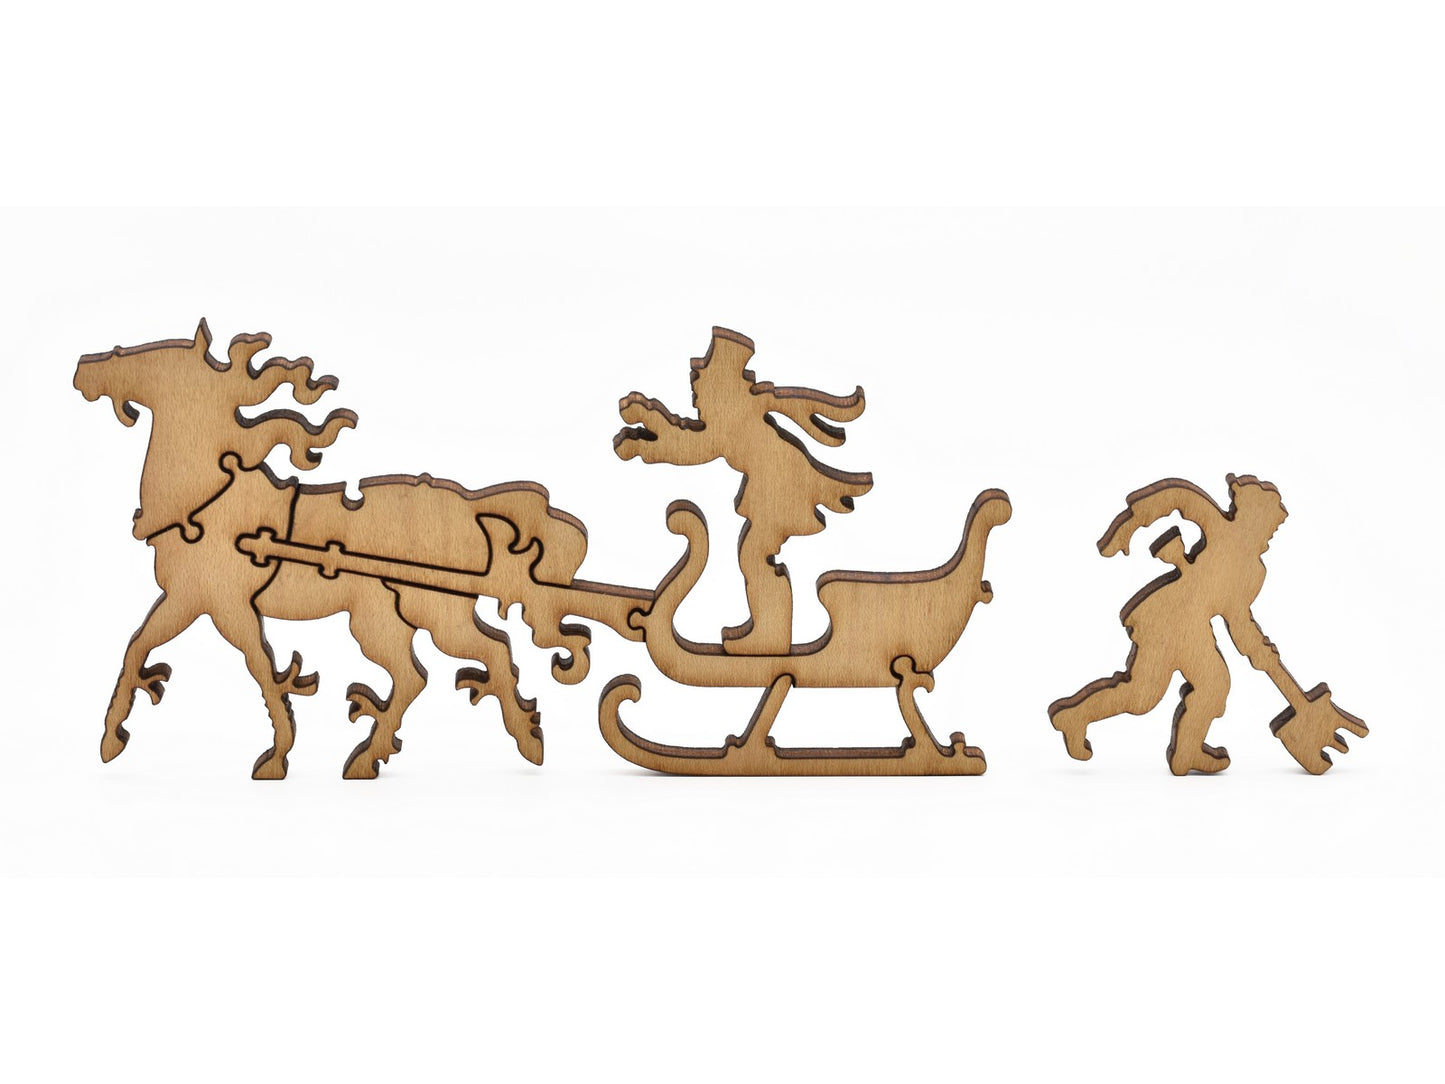 A closeup of pieces in the shape of a person driving a horse drawn sleigh and a person shoveling snow.